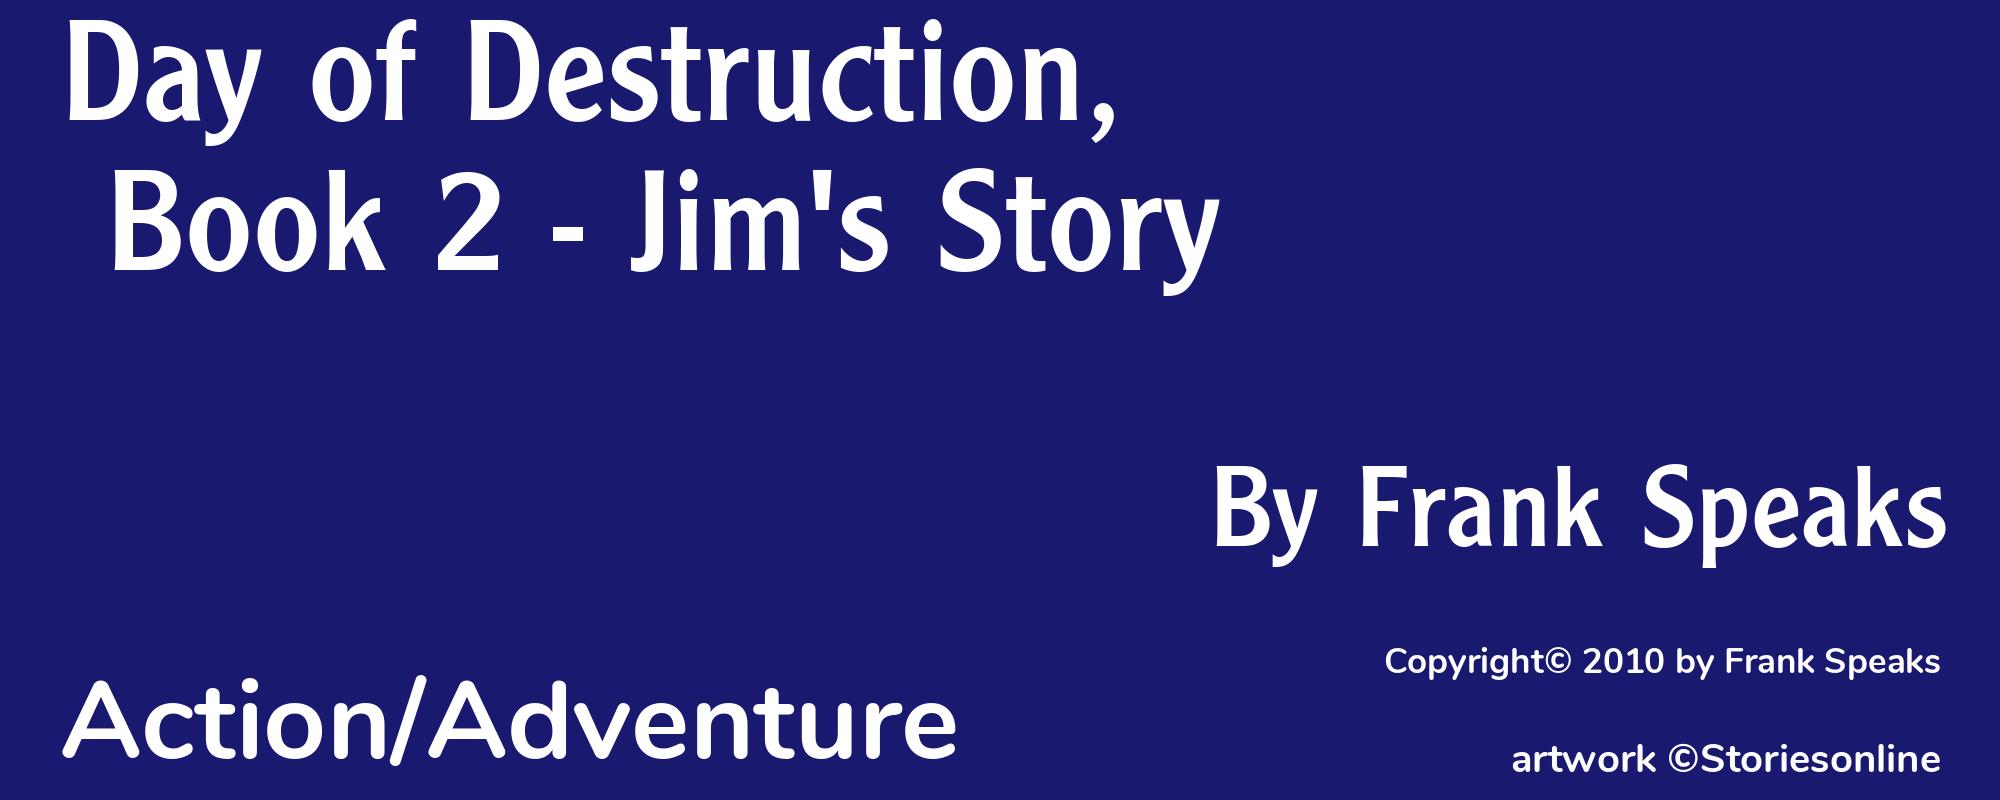 Day of Destruction, Book 2 - Jim's Story - Cover